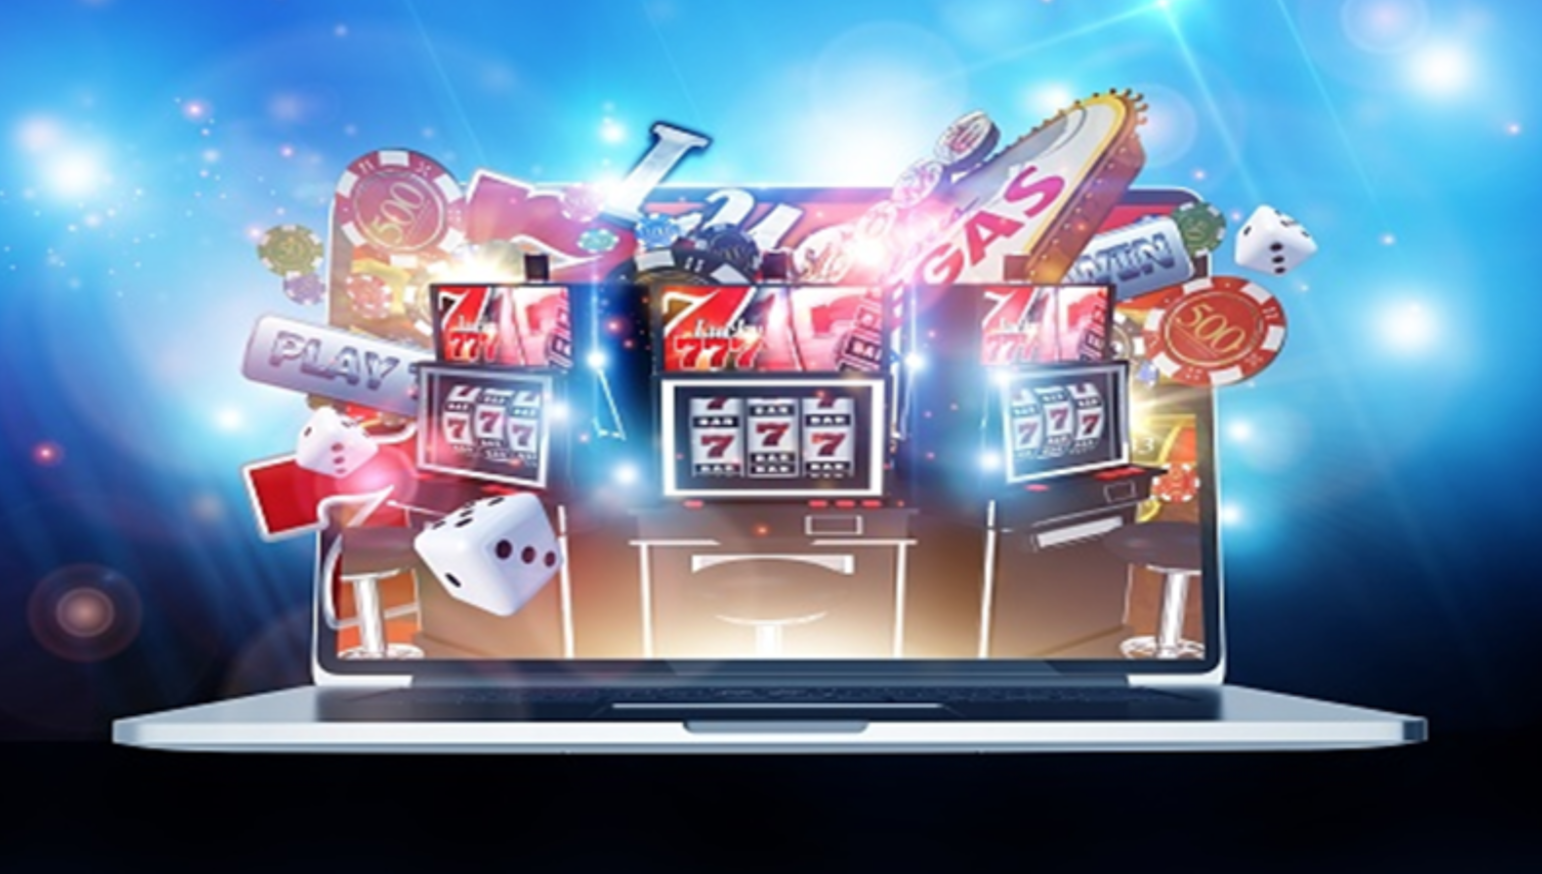 5 Tips on How to Find the Best Online Casinos for Your Needs